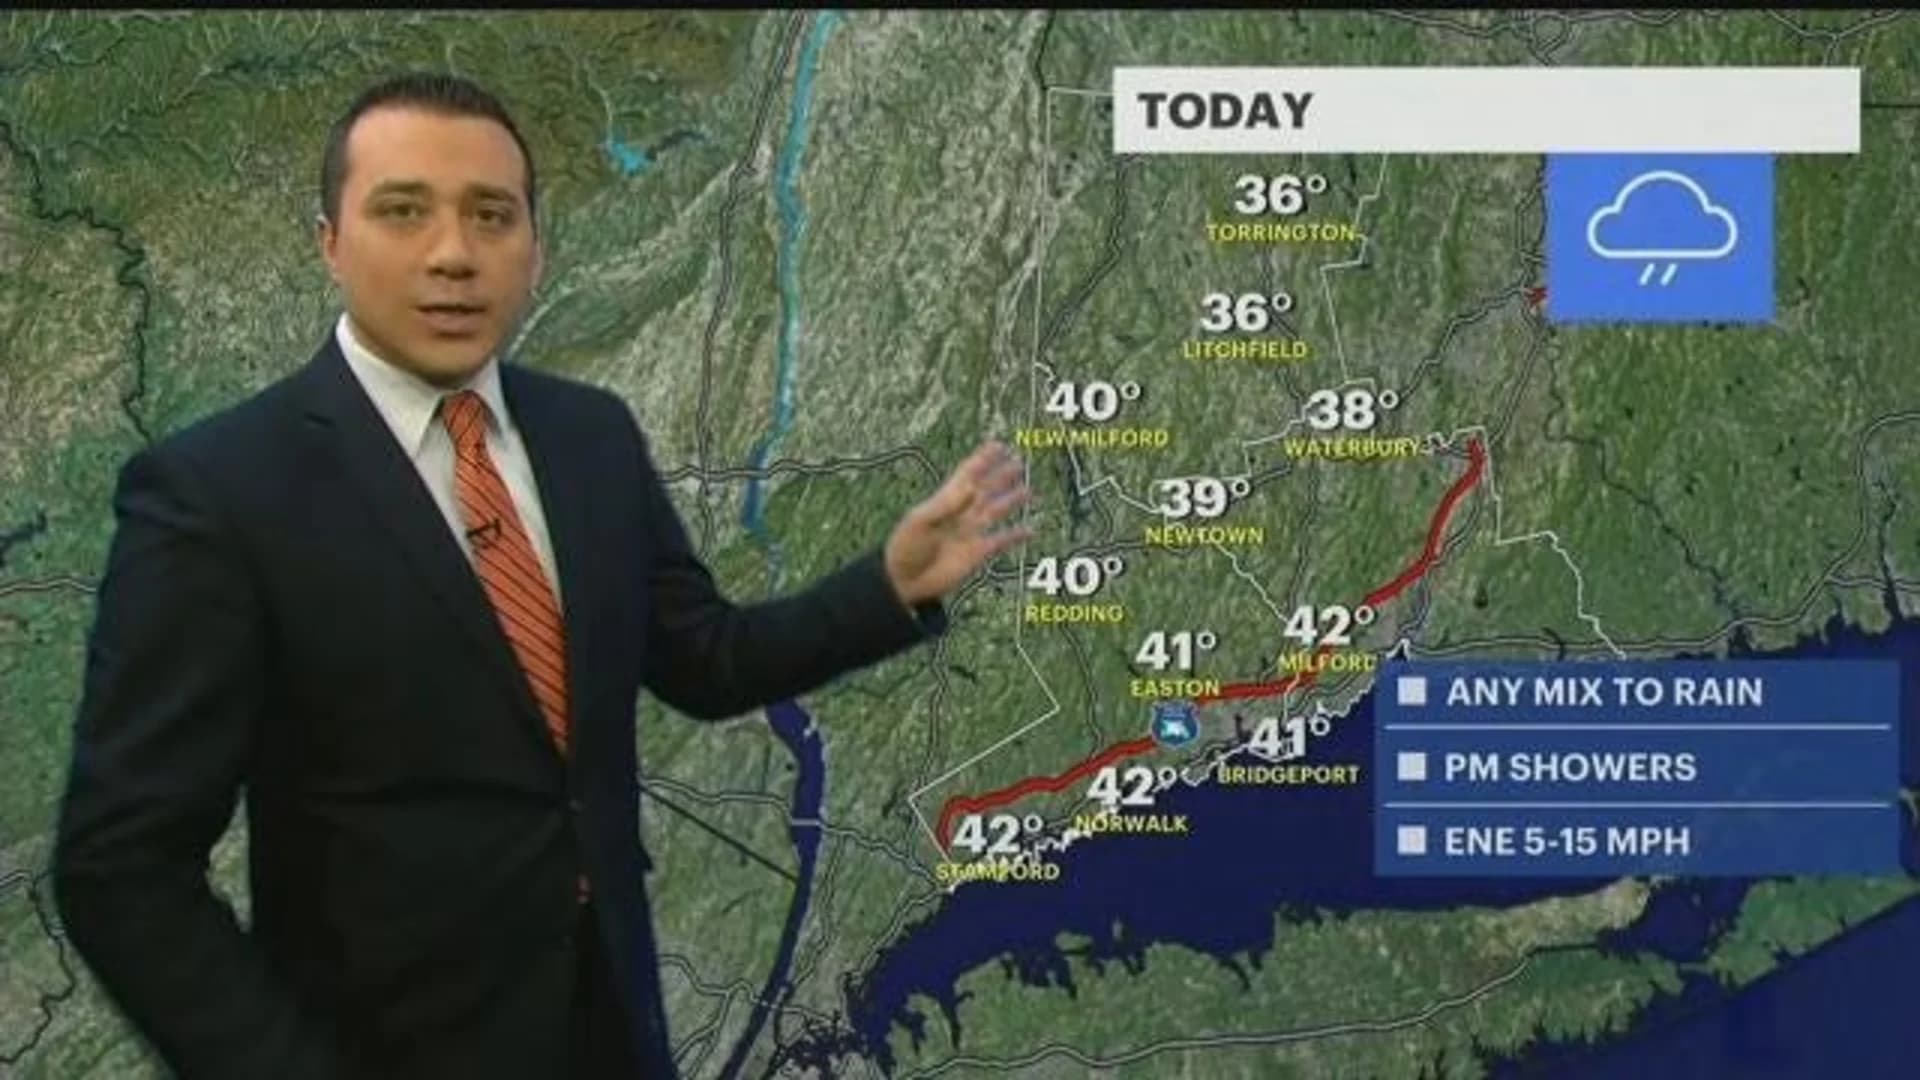 Snow, sleet likely to impact early morning commute in northwest Connecticut